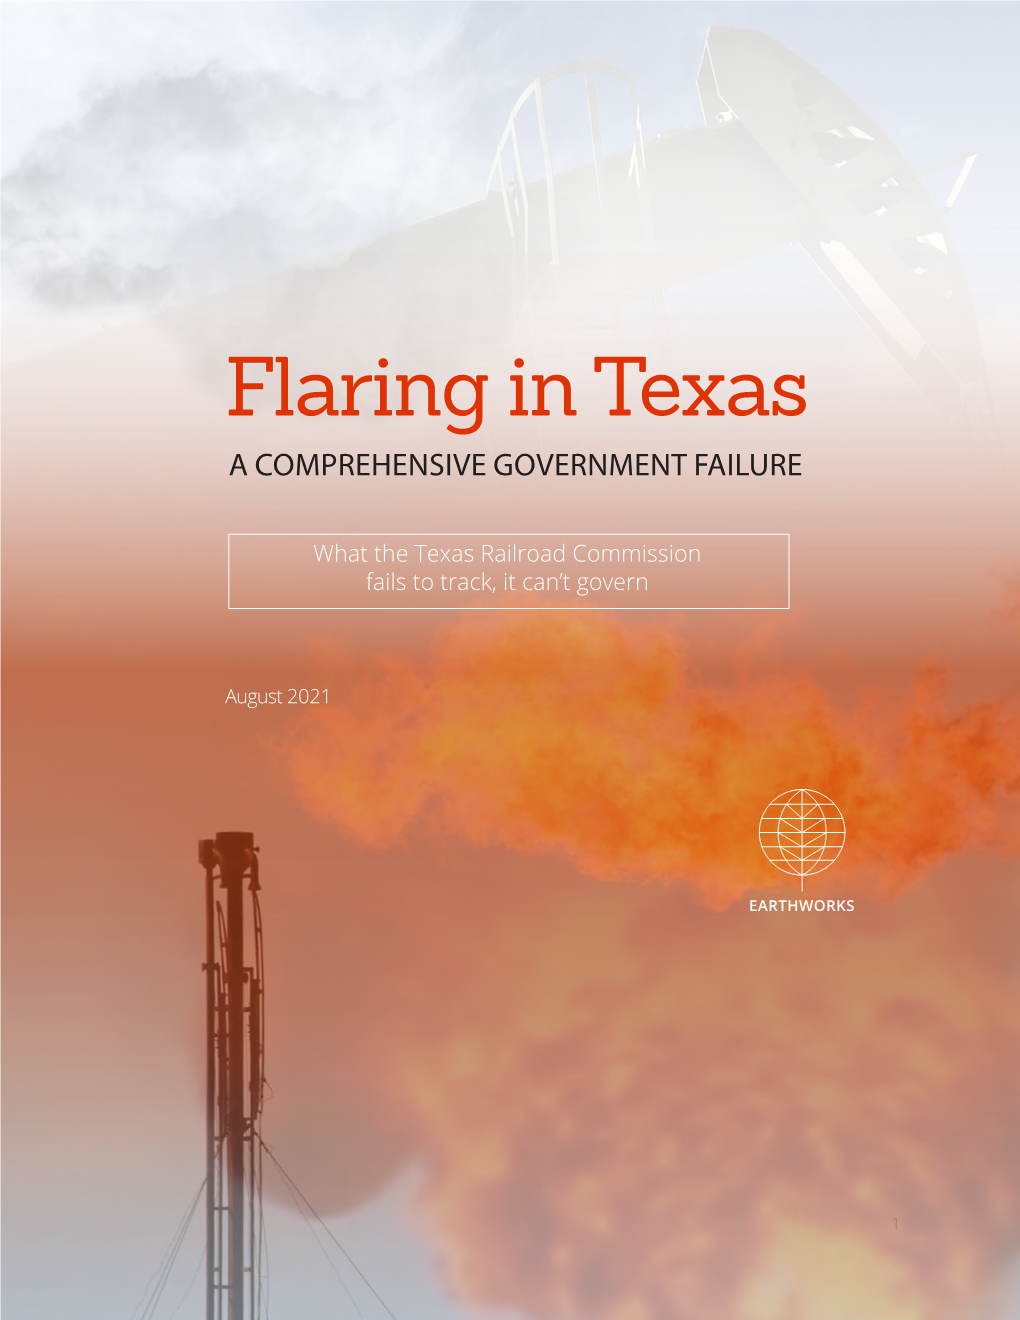 Flaring in Texas: a Comrehensive Government Failure